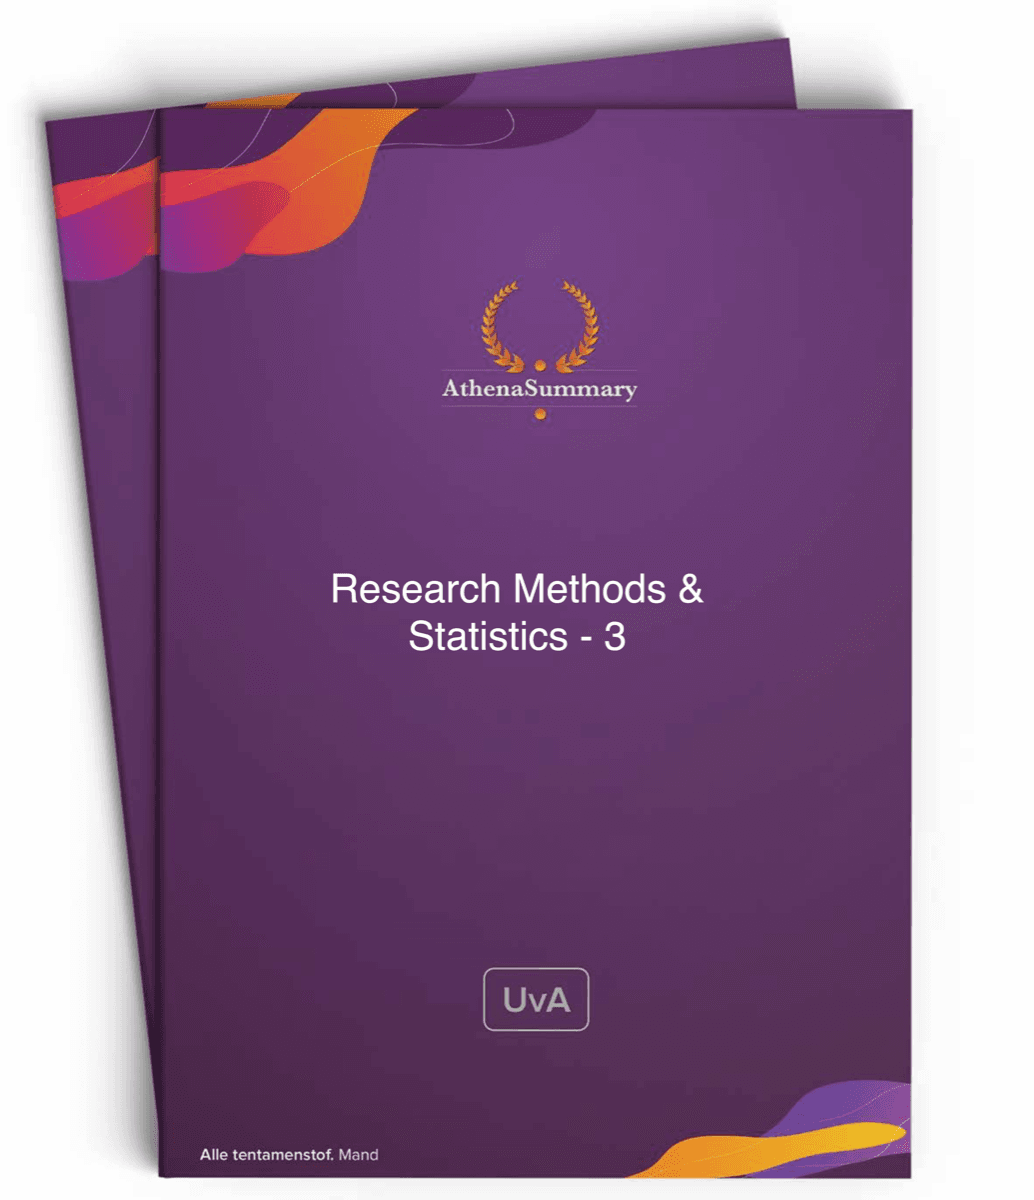 Literature Summary: Research Methods and Statistics - 3